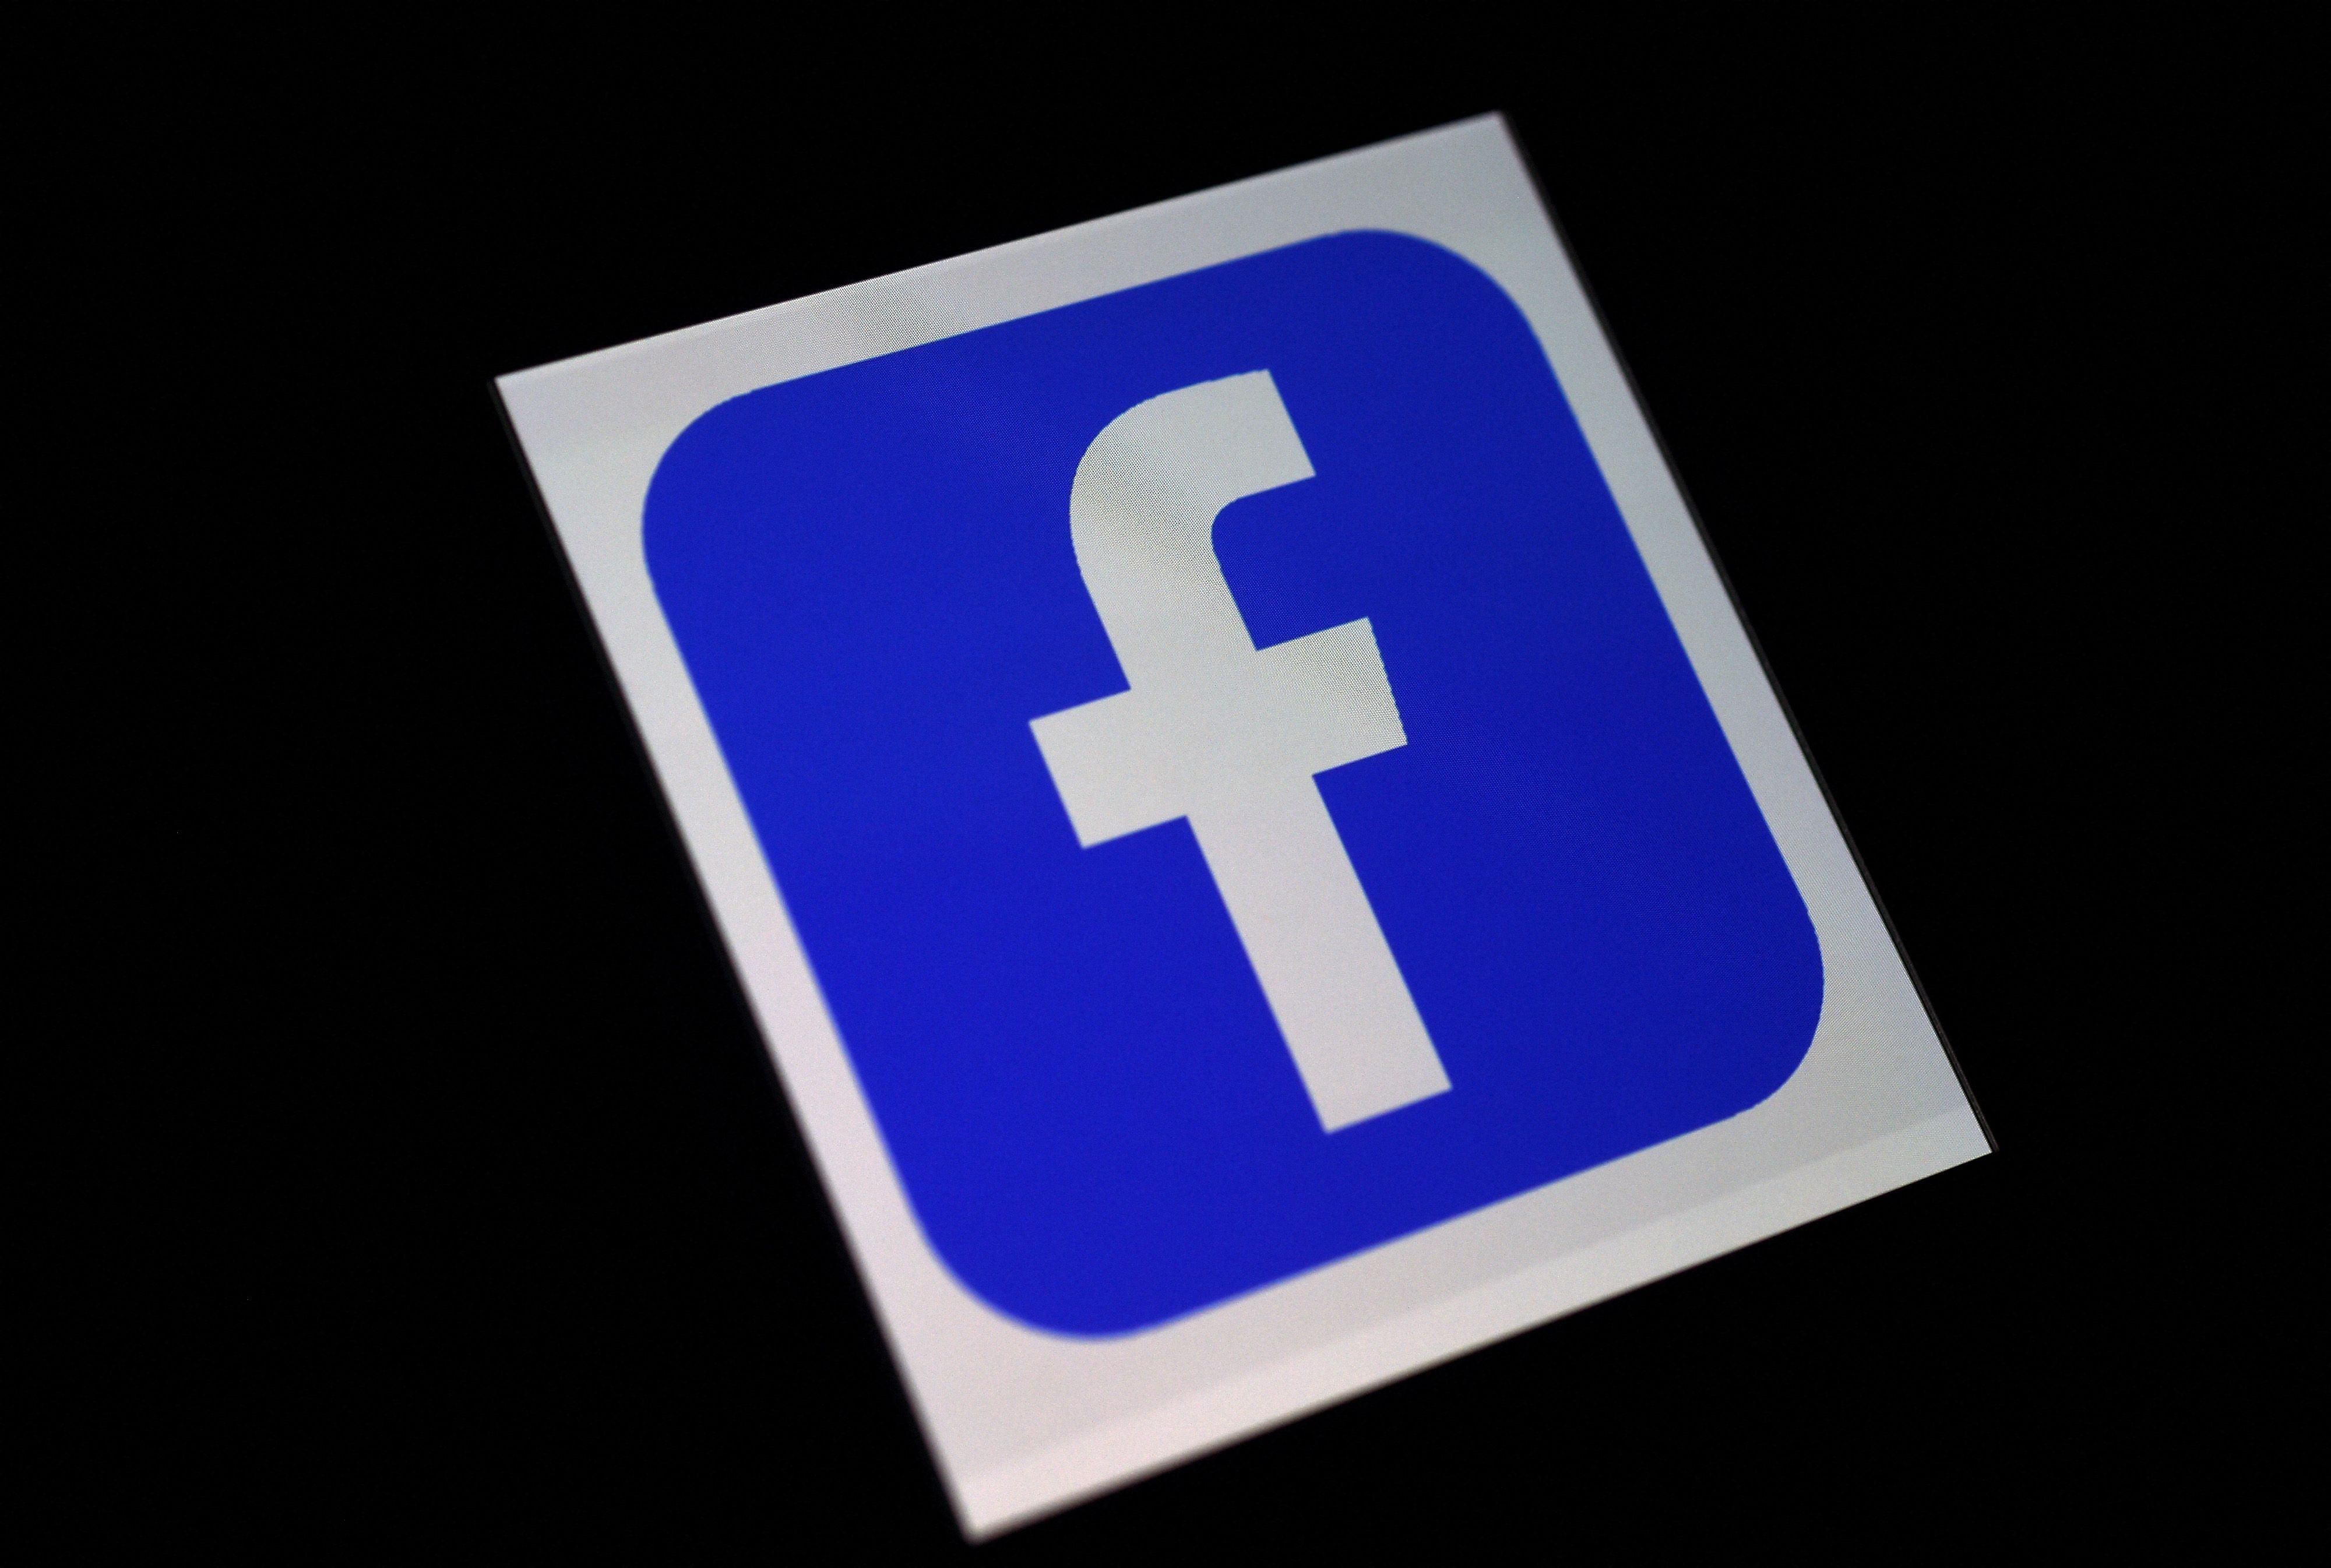 At the end of January 2020, Facebook agreed to pay $550 million after it failed to get the lawsuit -- filed as a class action in 2018 -- dismissed. Representative image/Credit: AFP Photo